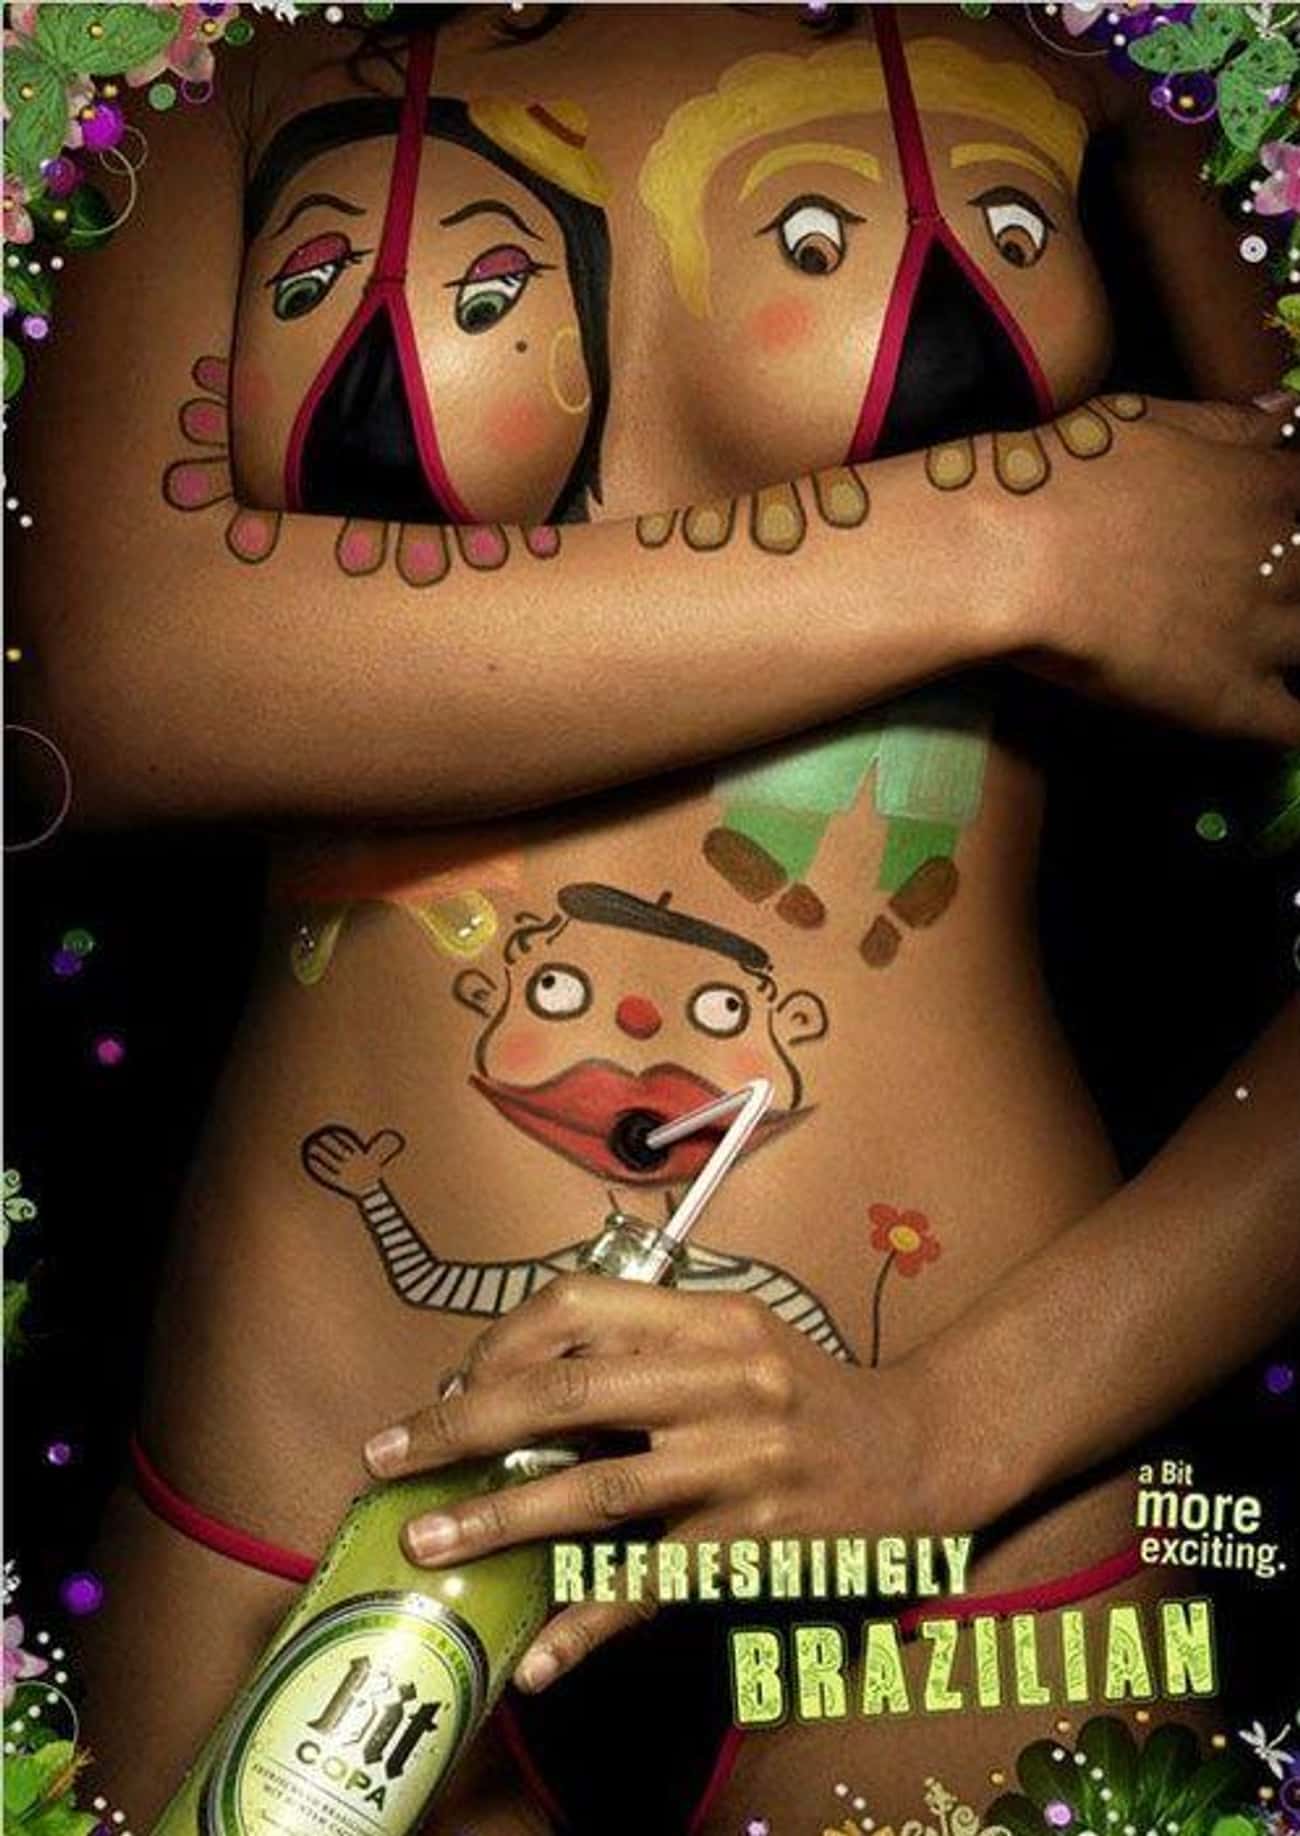 How To Get Belly Button Wasted